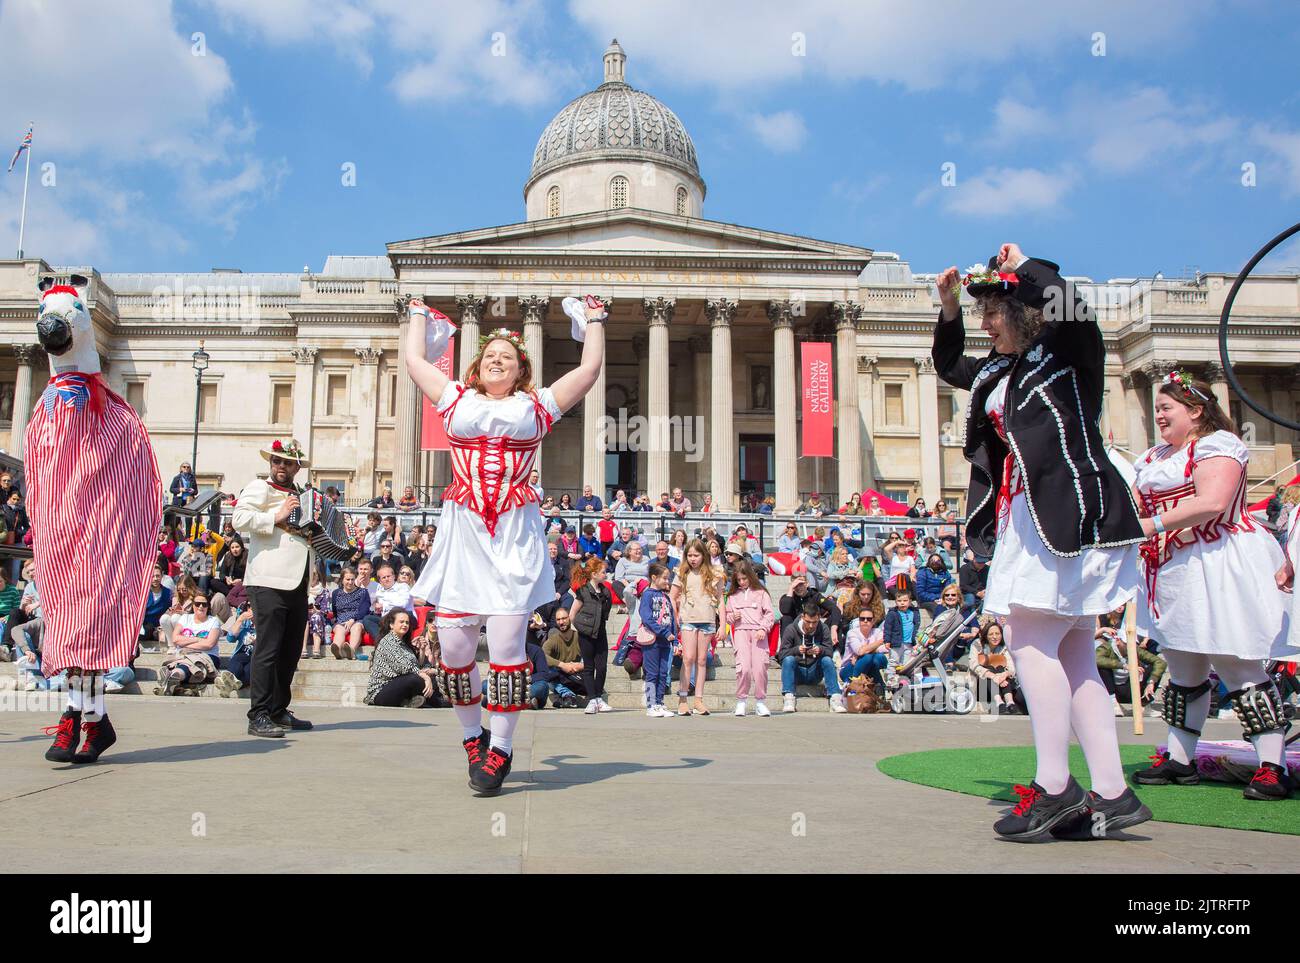 People watch Morris dancers as they gather for St George’s Day celebrations in Trafalgar Square, central London. Stock Photo